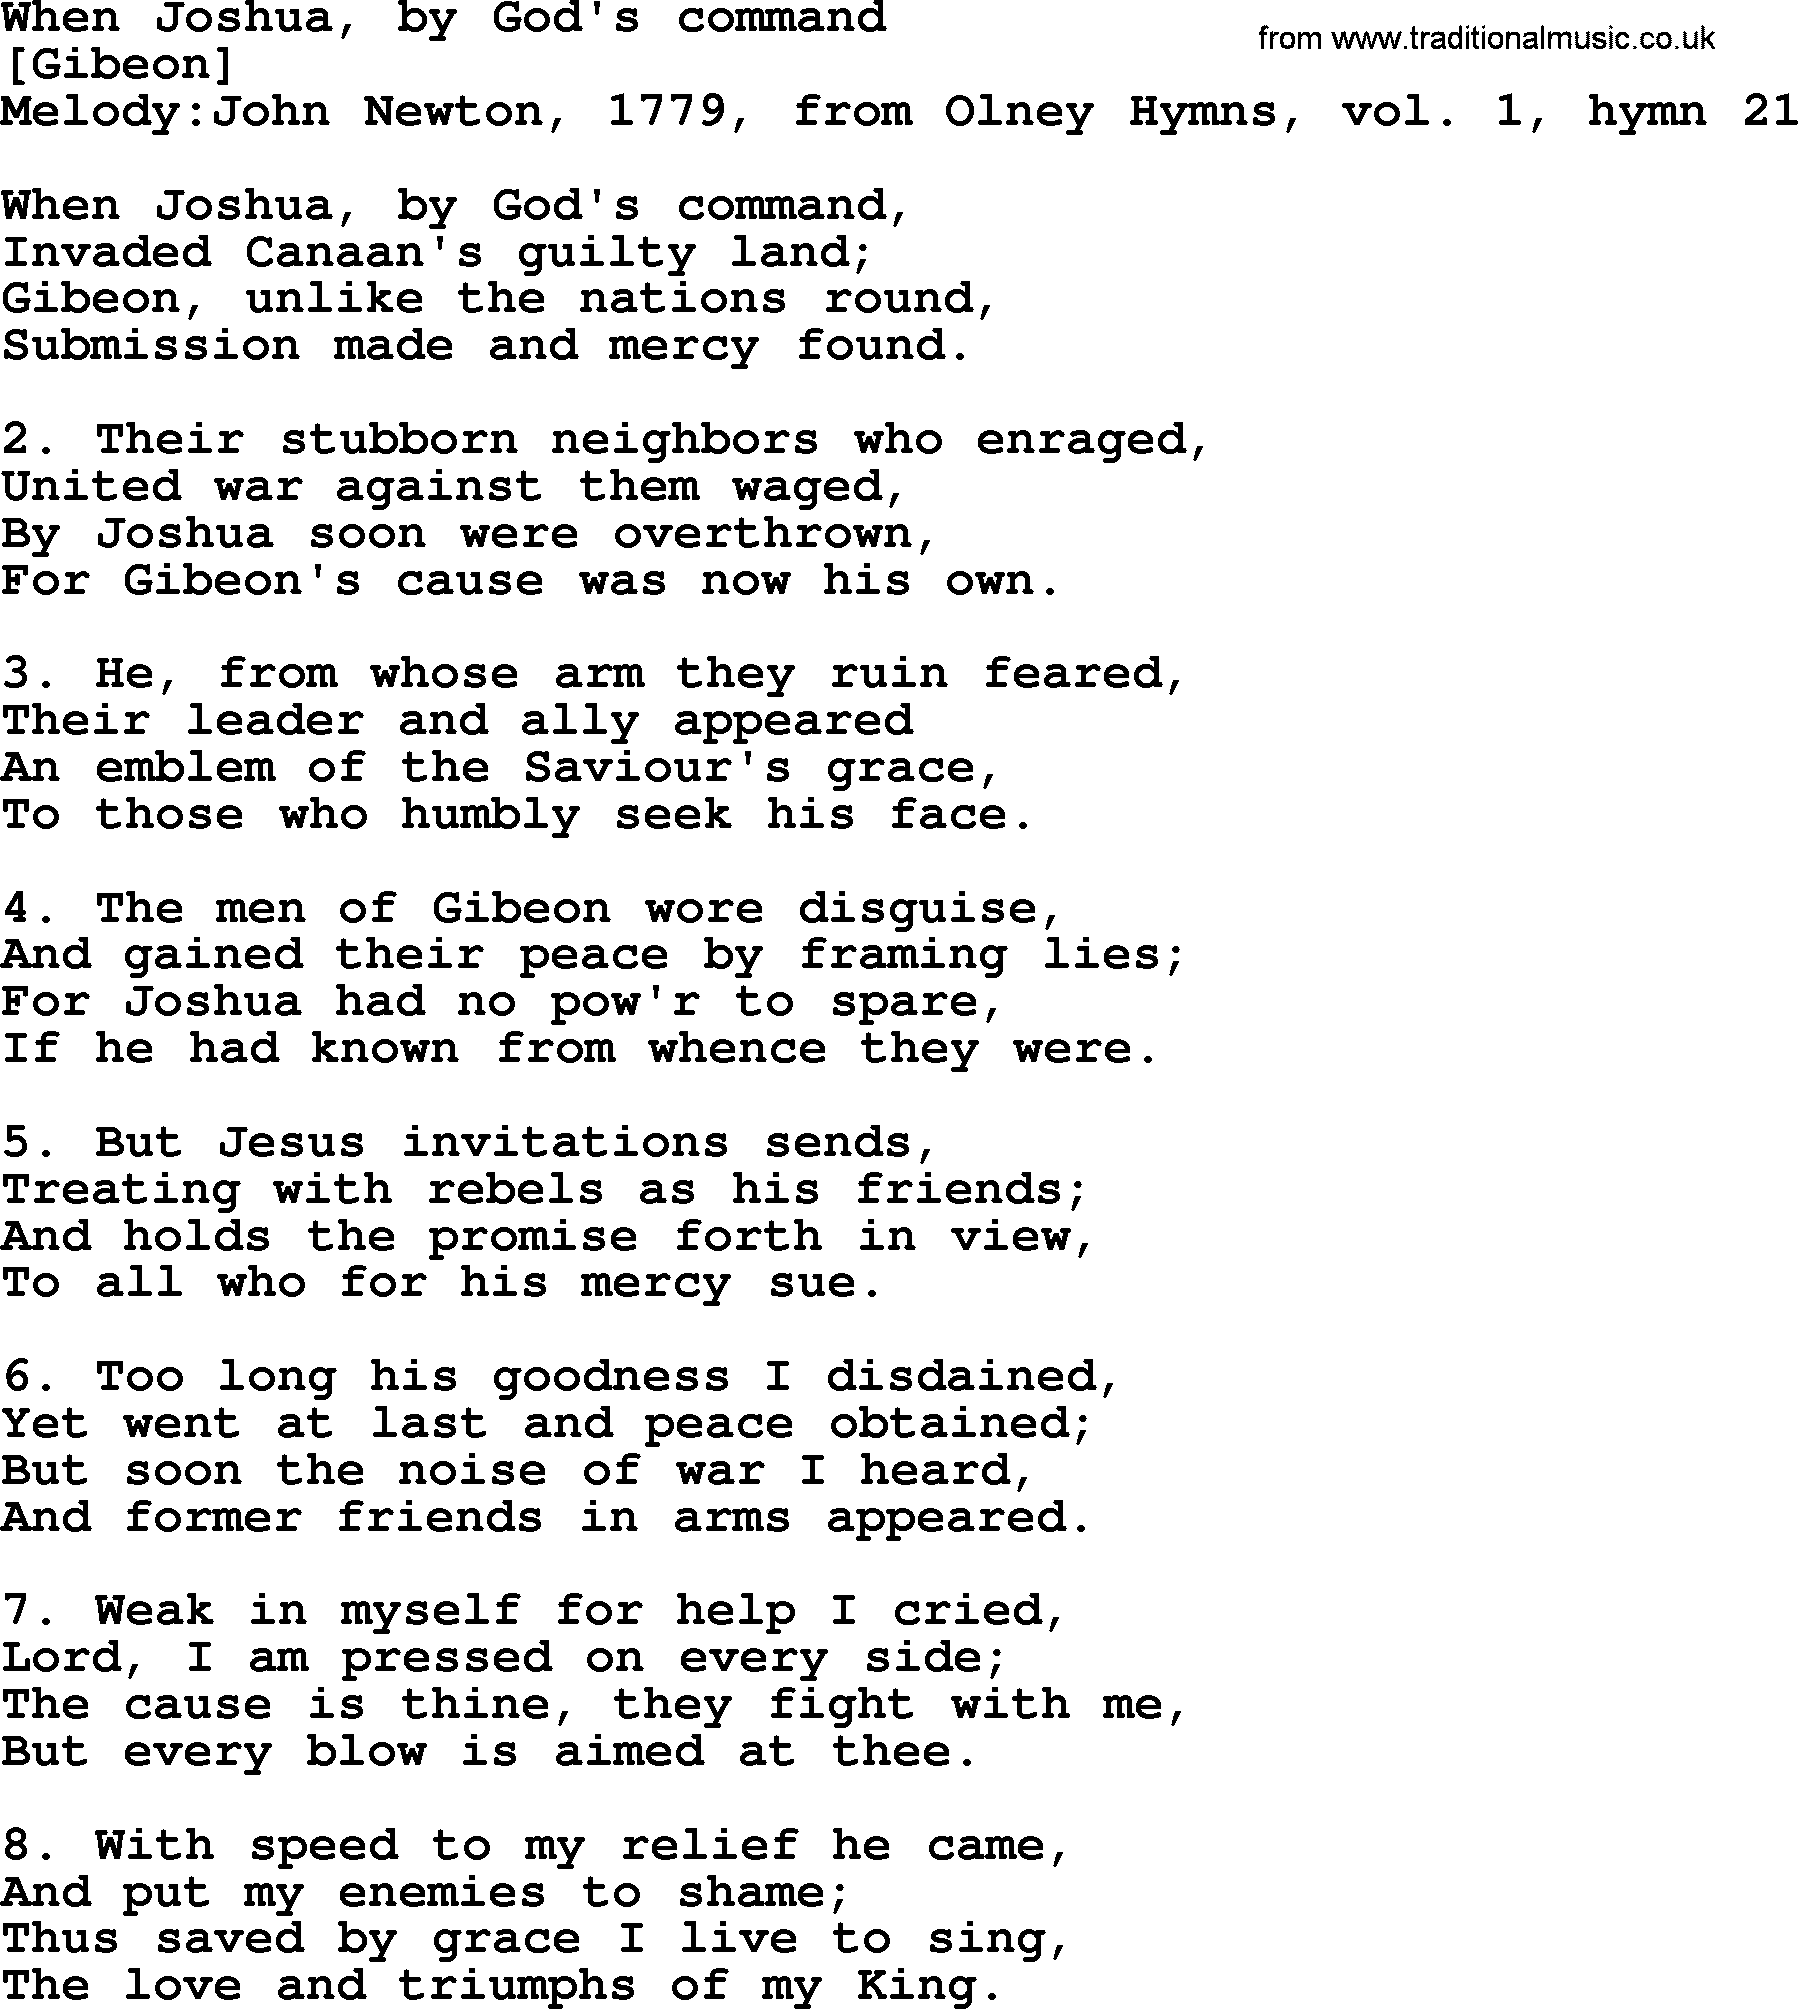 Old English Song: When Joshua, By God's Command lyrics